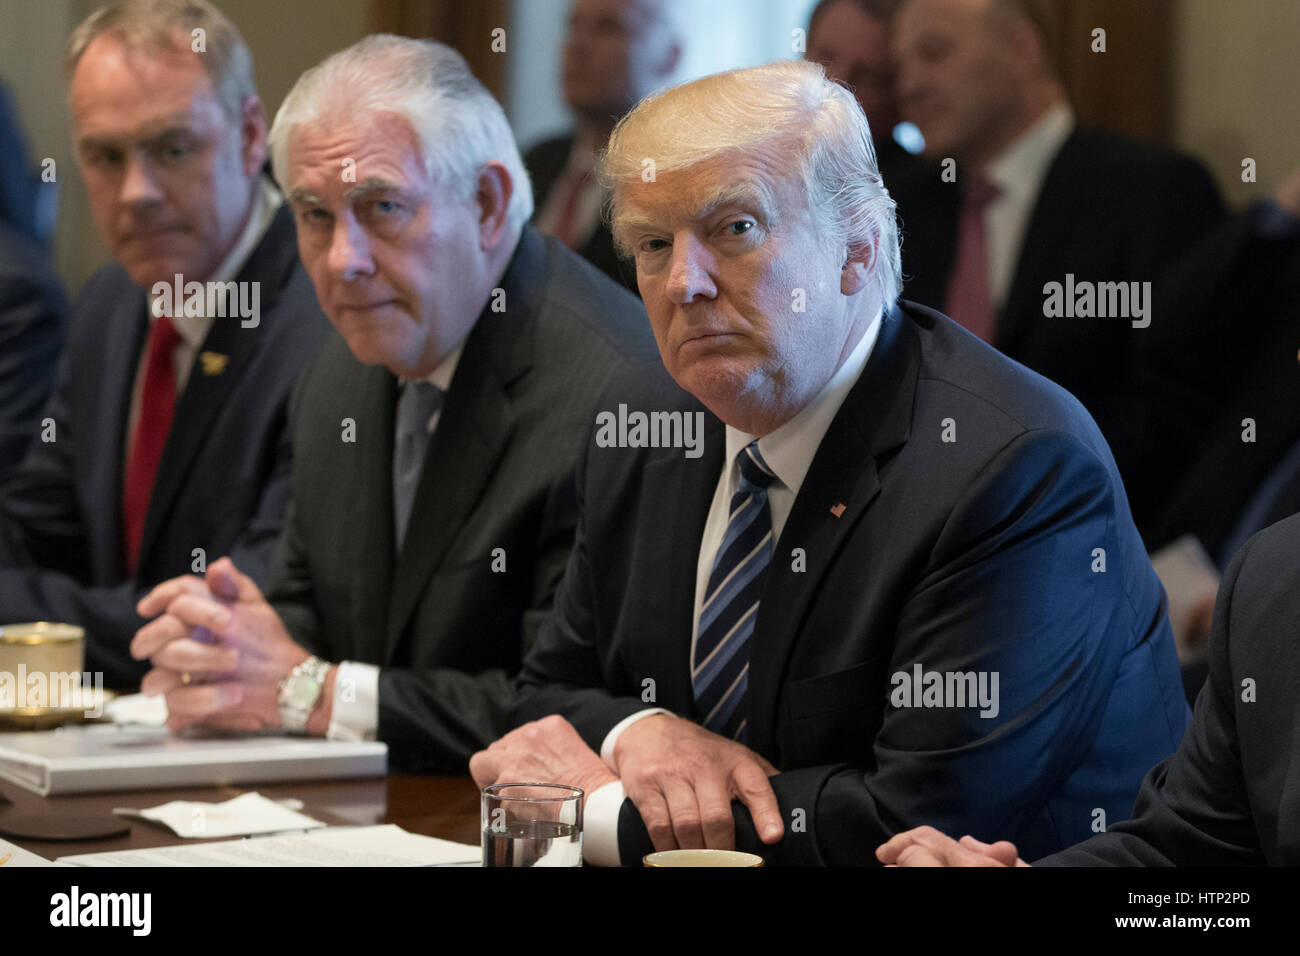 Washington DC, USA 13th March, 2017 US President Donald J Trump (R) holds a meeting with members of his Cabinet in the Cabinet Room of the White House in Washington, DC, USA, 13 March 2017 Also in the picture is Secretary of the Interior Ryan Zinke (L) an Stock Photo